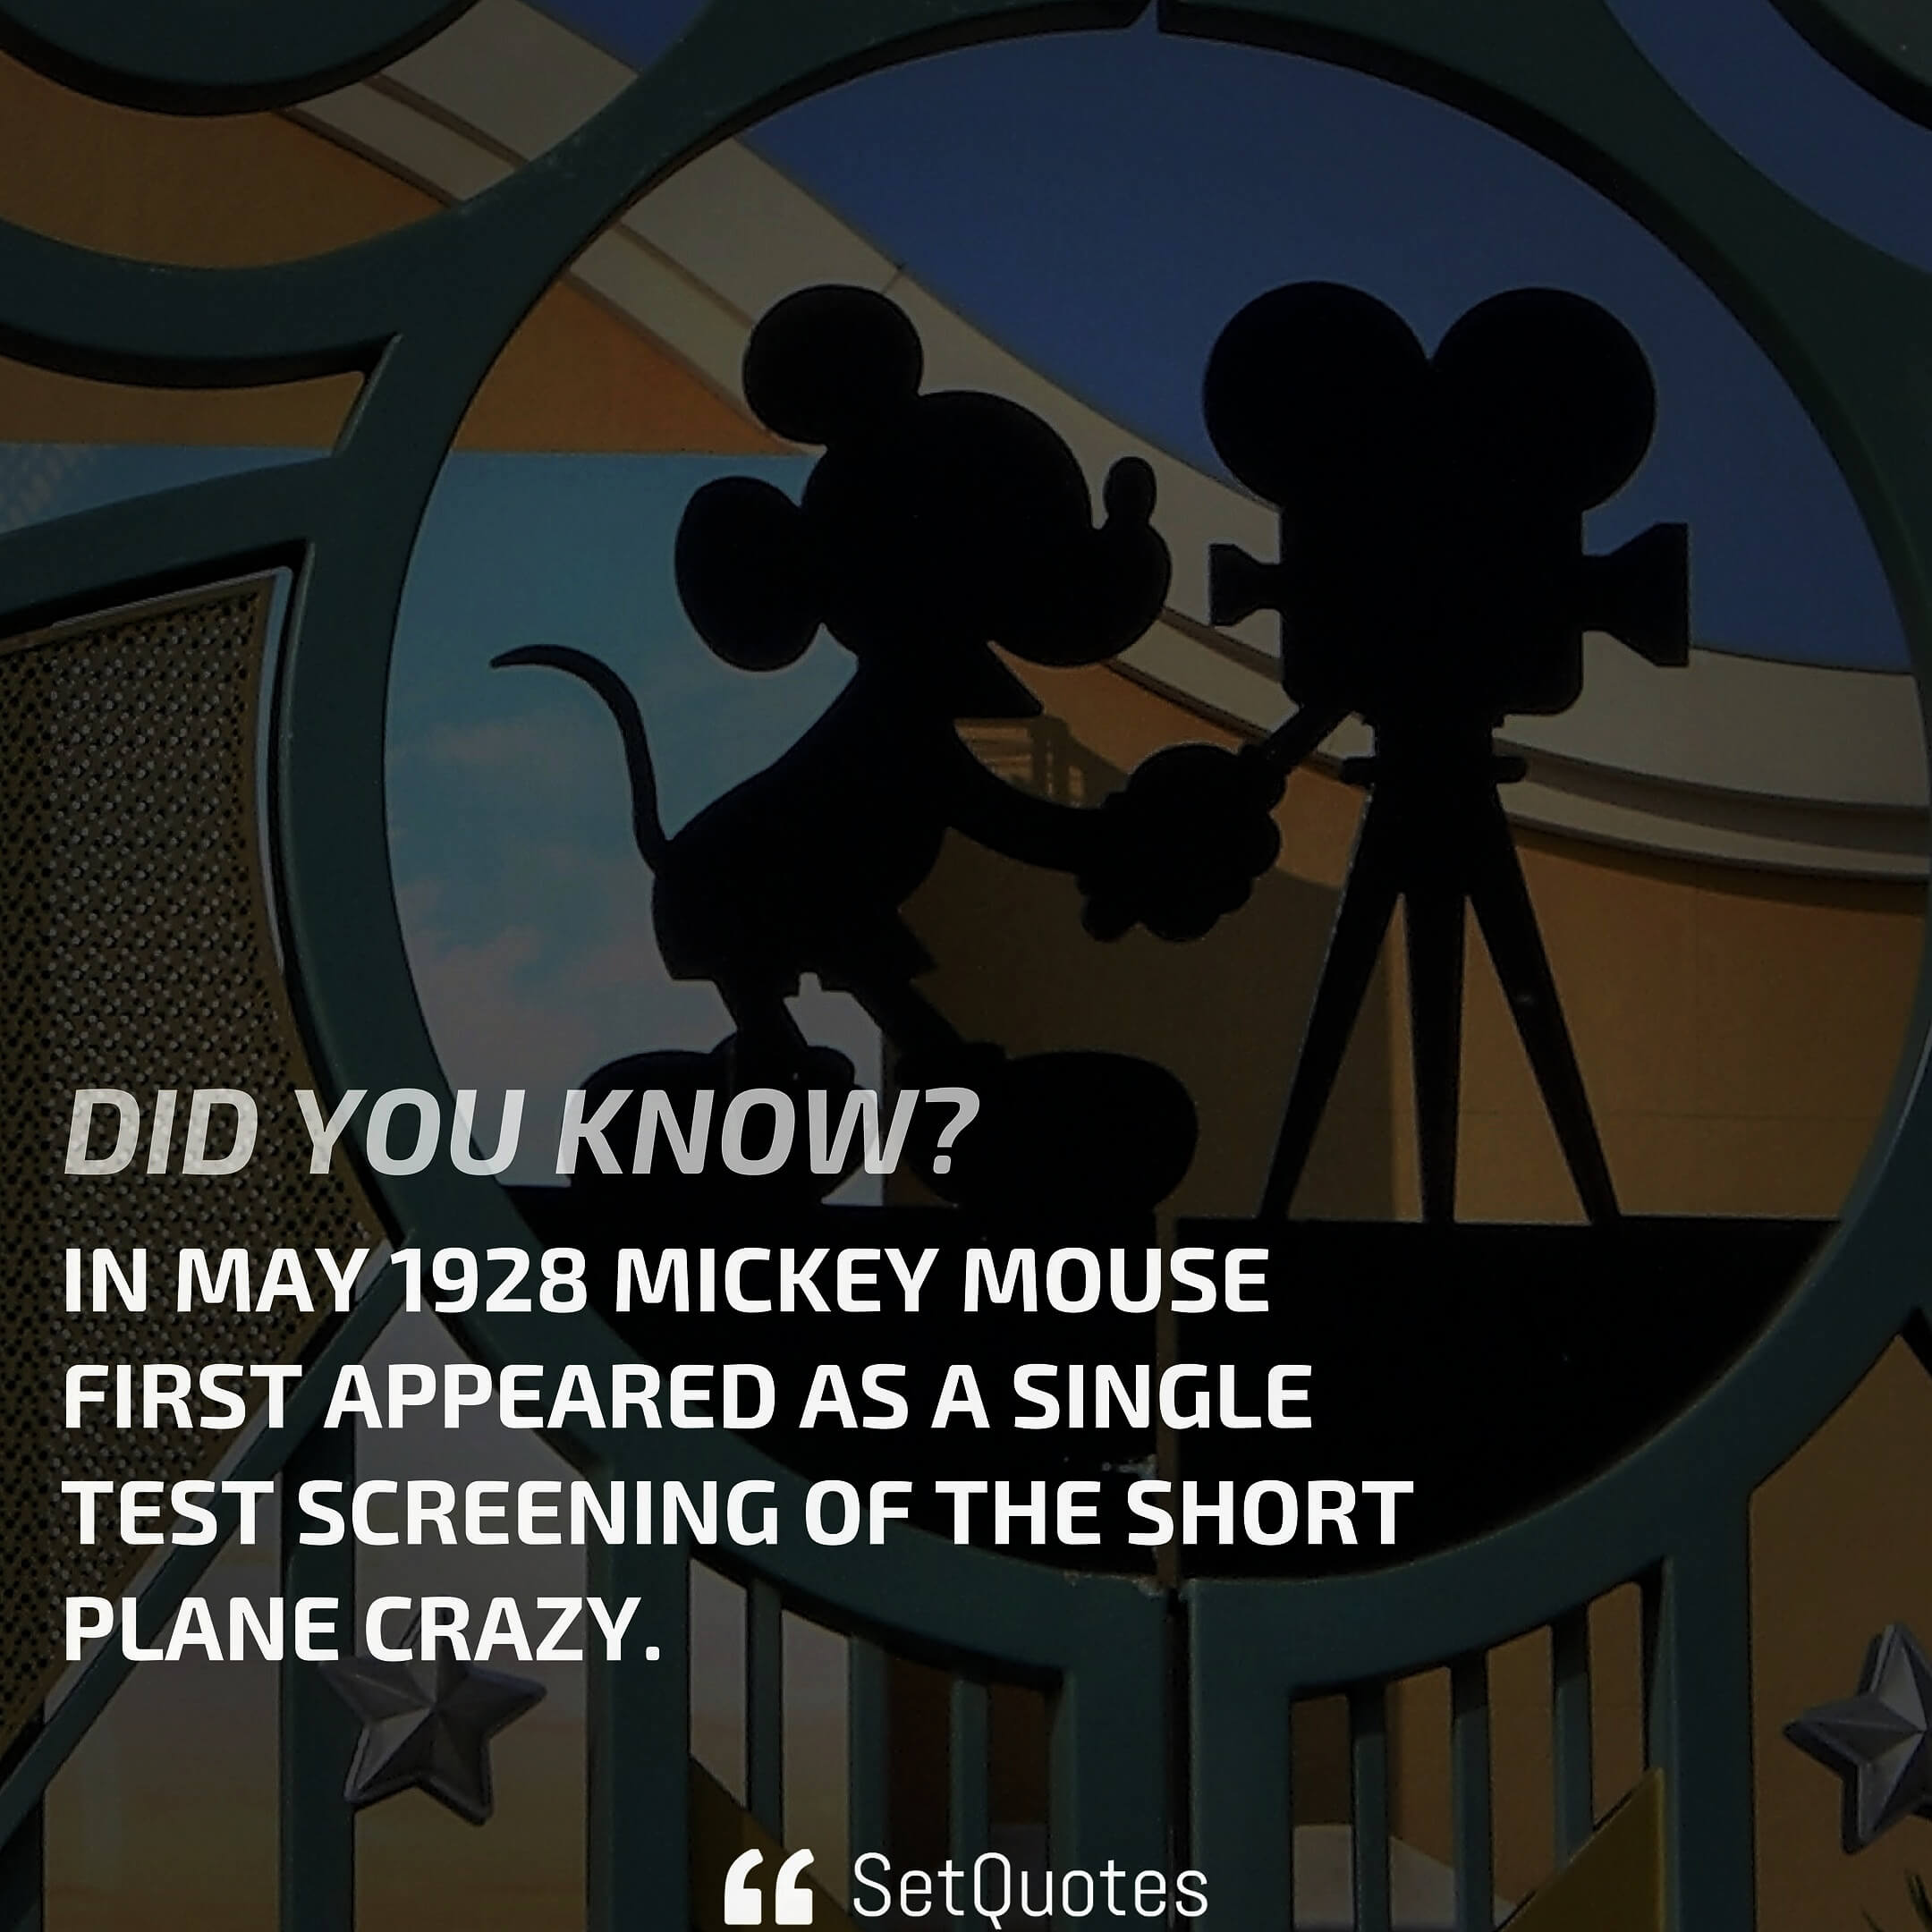 In may 1928 mickey mouse first appeared as a single test screening of the short plane crazy.